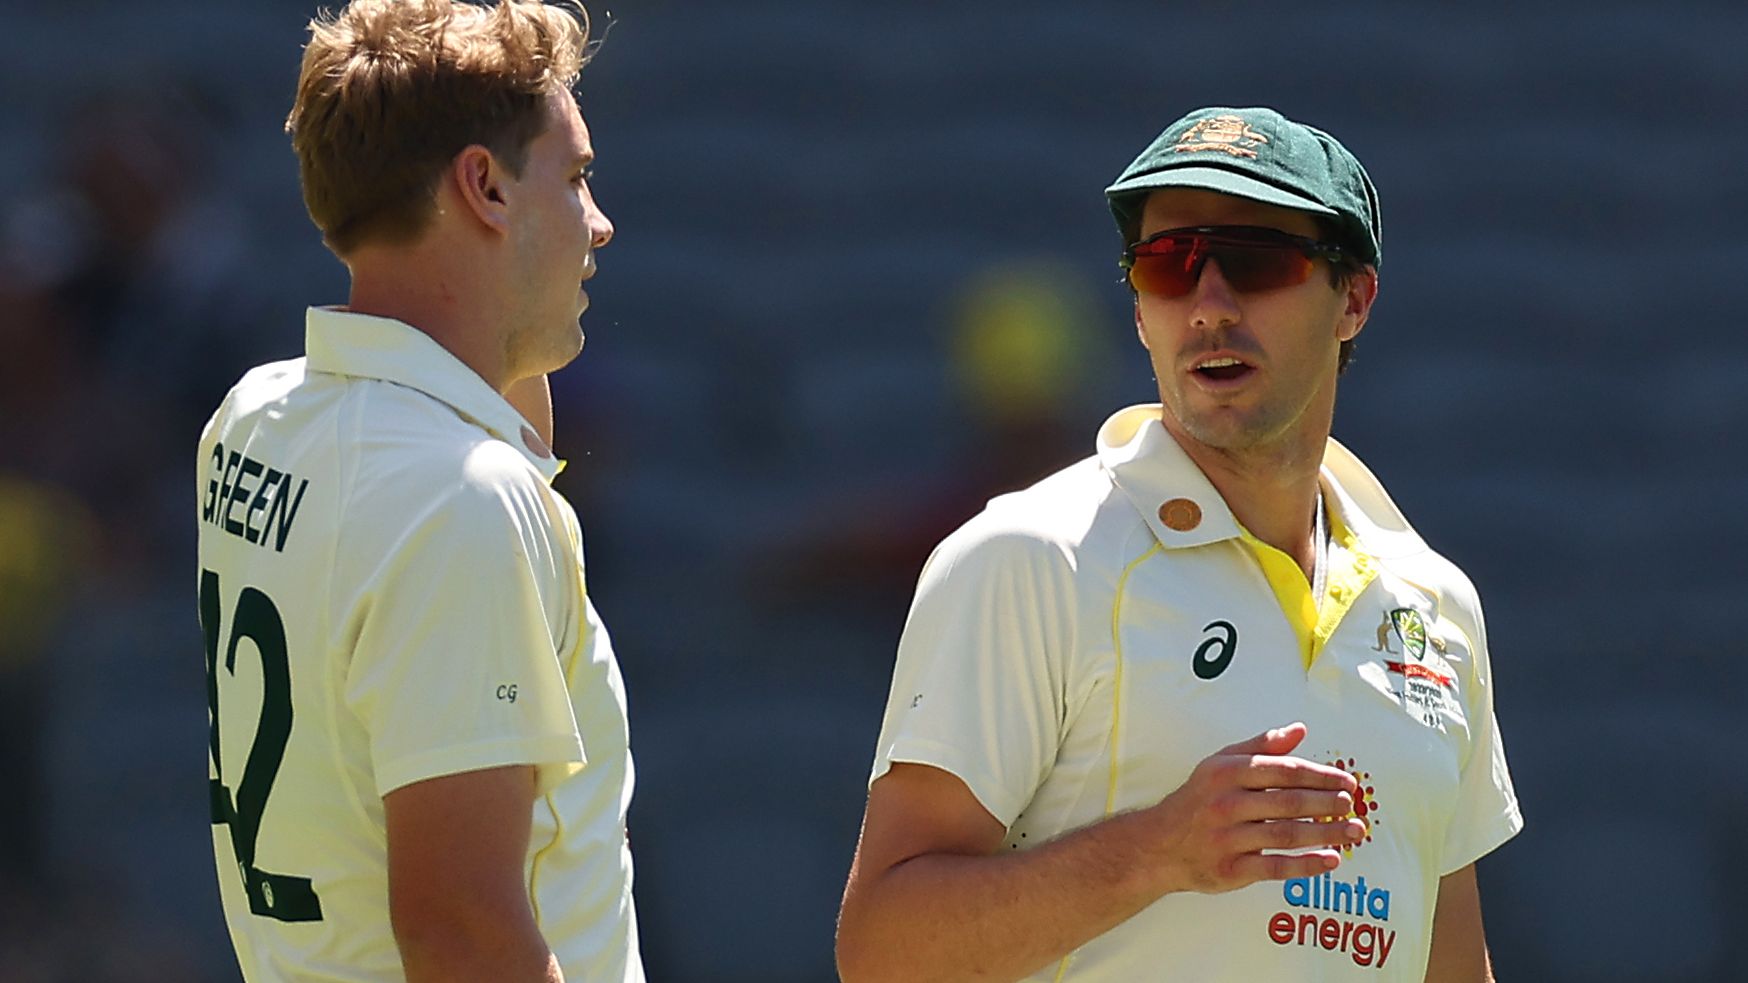 PERTH, AUSTRALIA - DECEMBER 02: Cameron Green of Australia speaks to Pat Cummins during day three of the First Test match between Australia and the West Indies at Optus Stadium on December 02, 2022 in Perth, Australia. (Photo by Cameron Spencer/Getty Images)